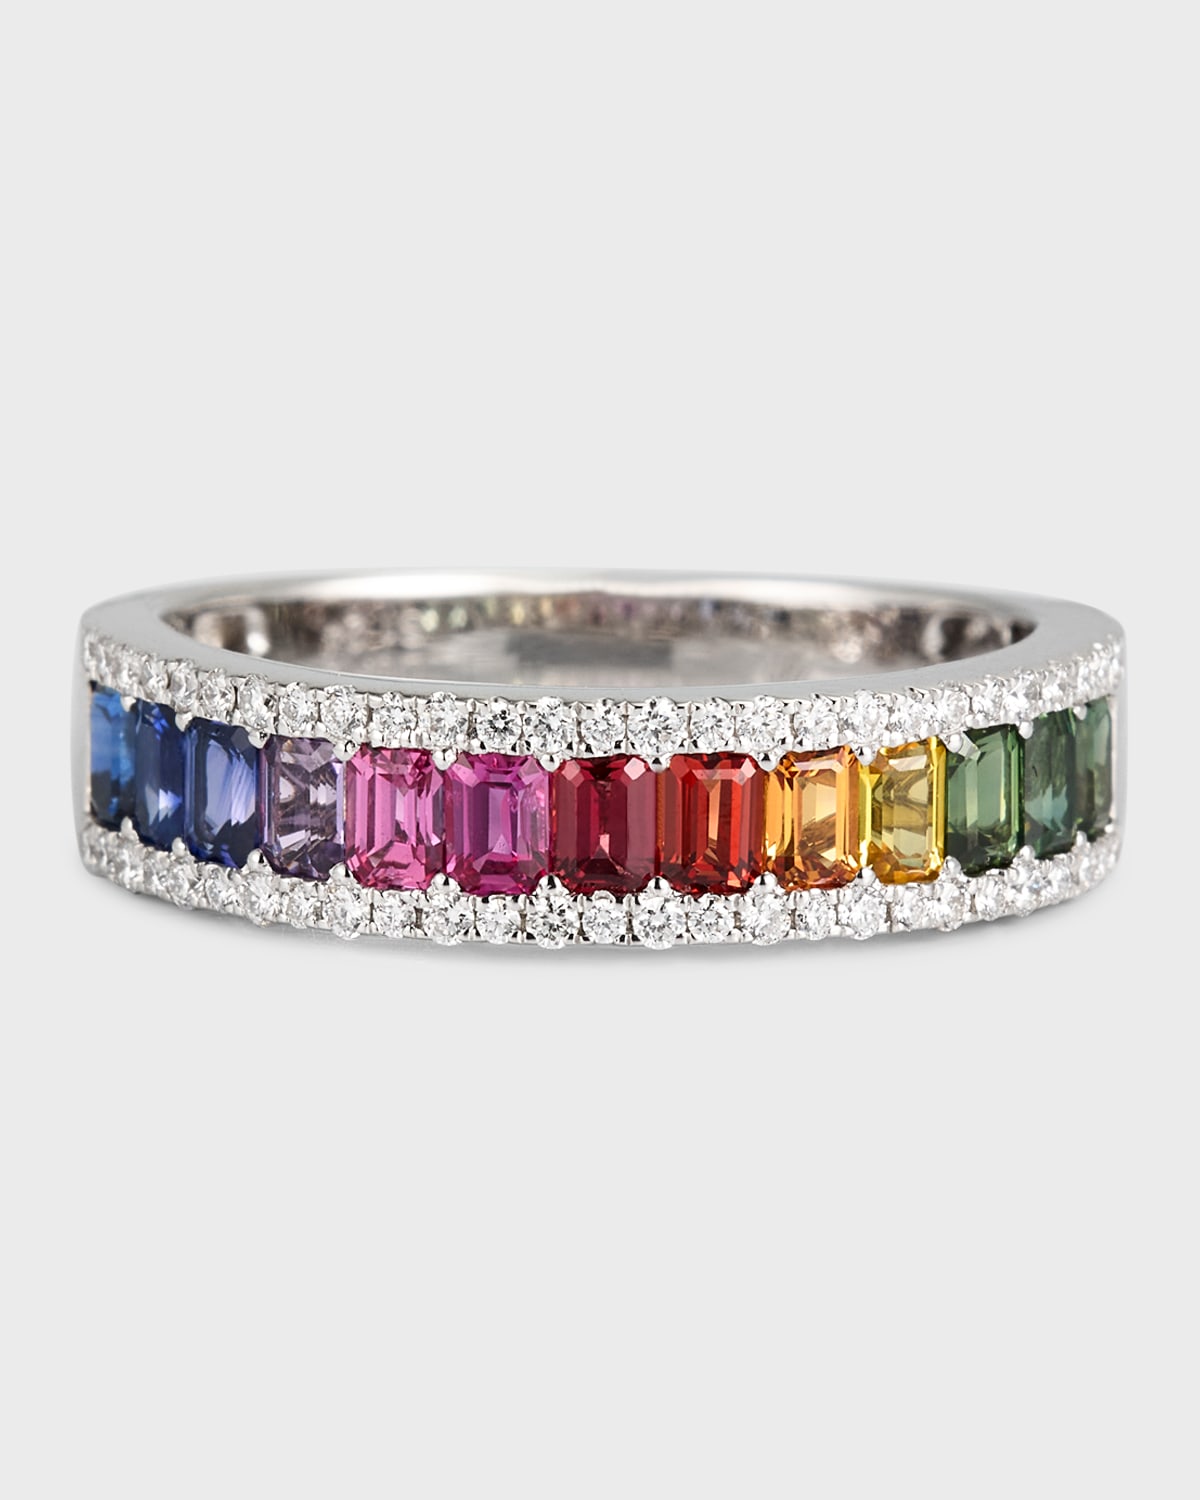 18K White Gold Ring with Multicolor Sapphires and Diamonds, Size 6.5